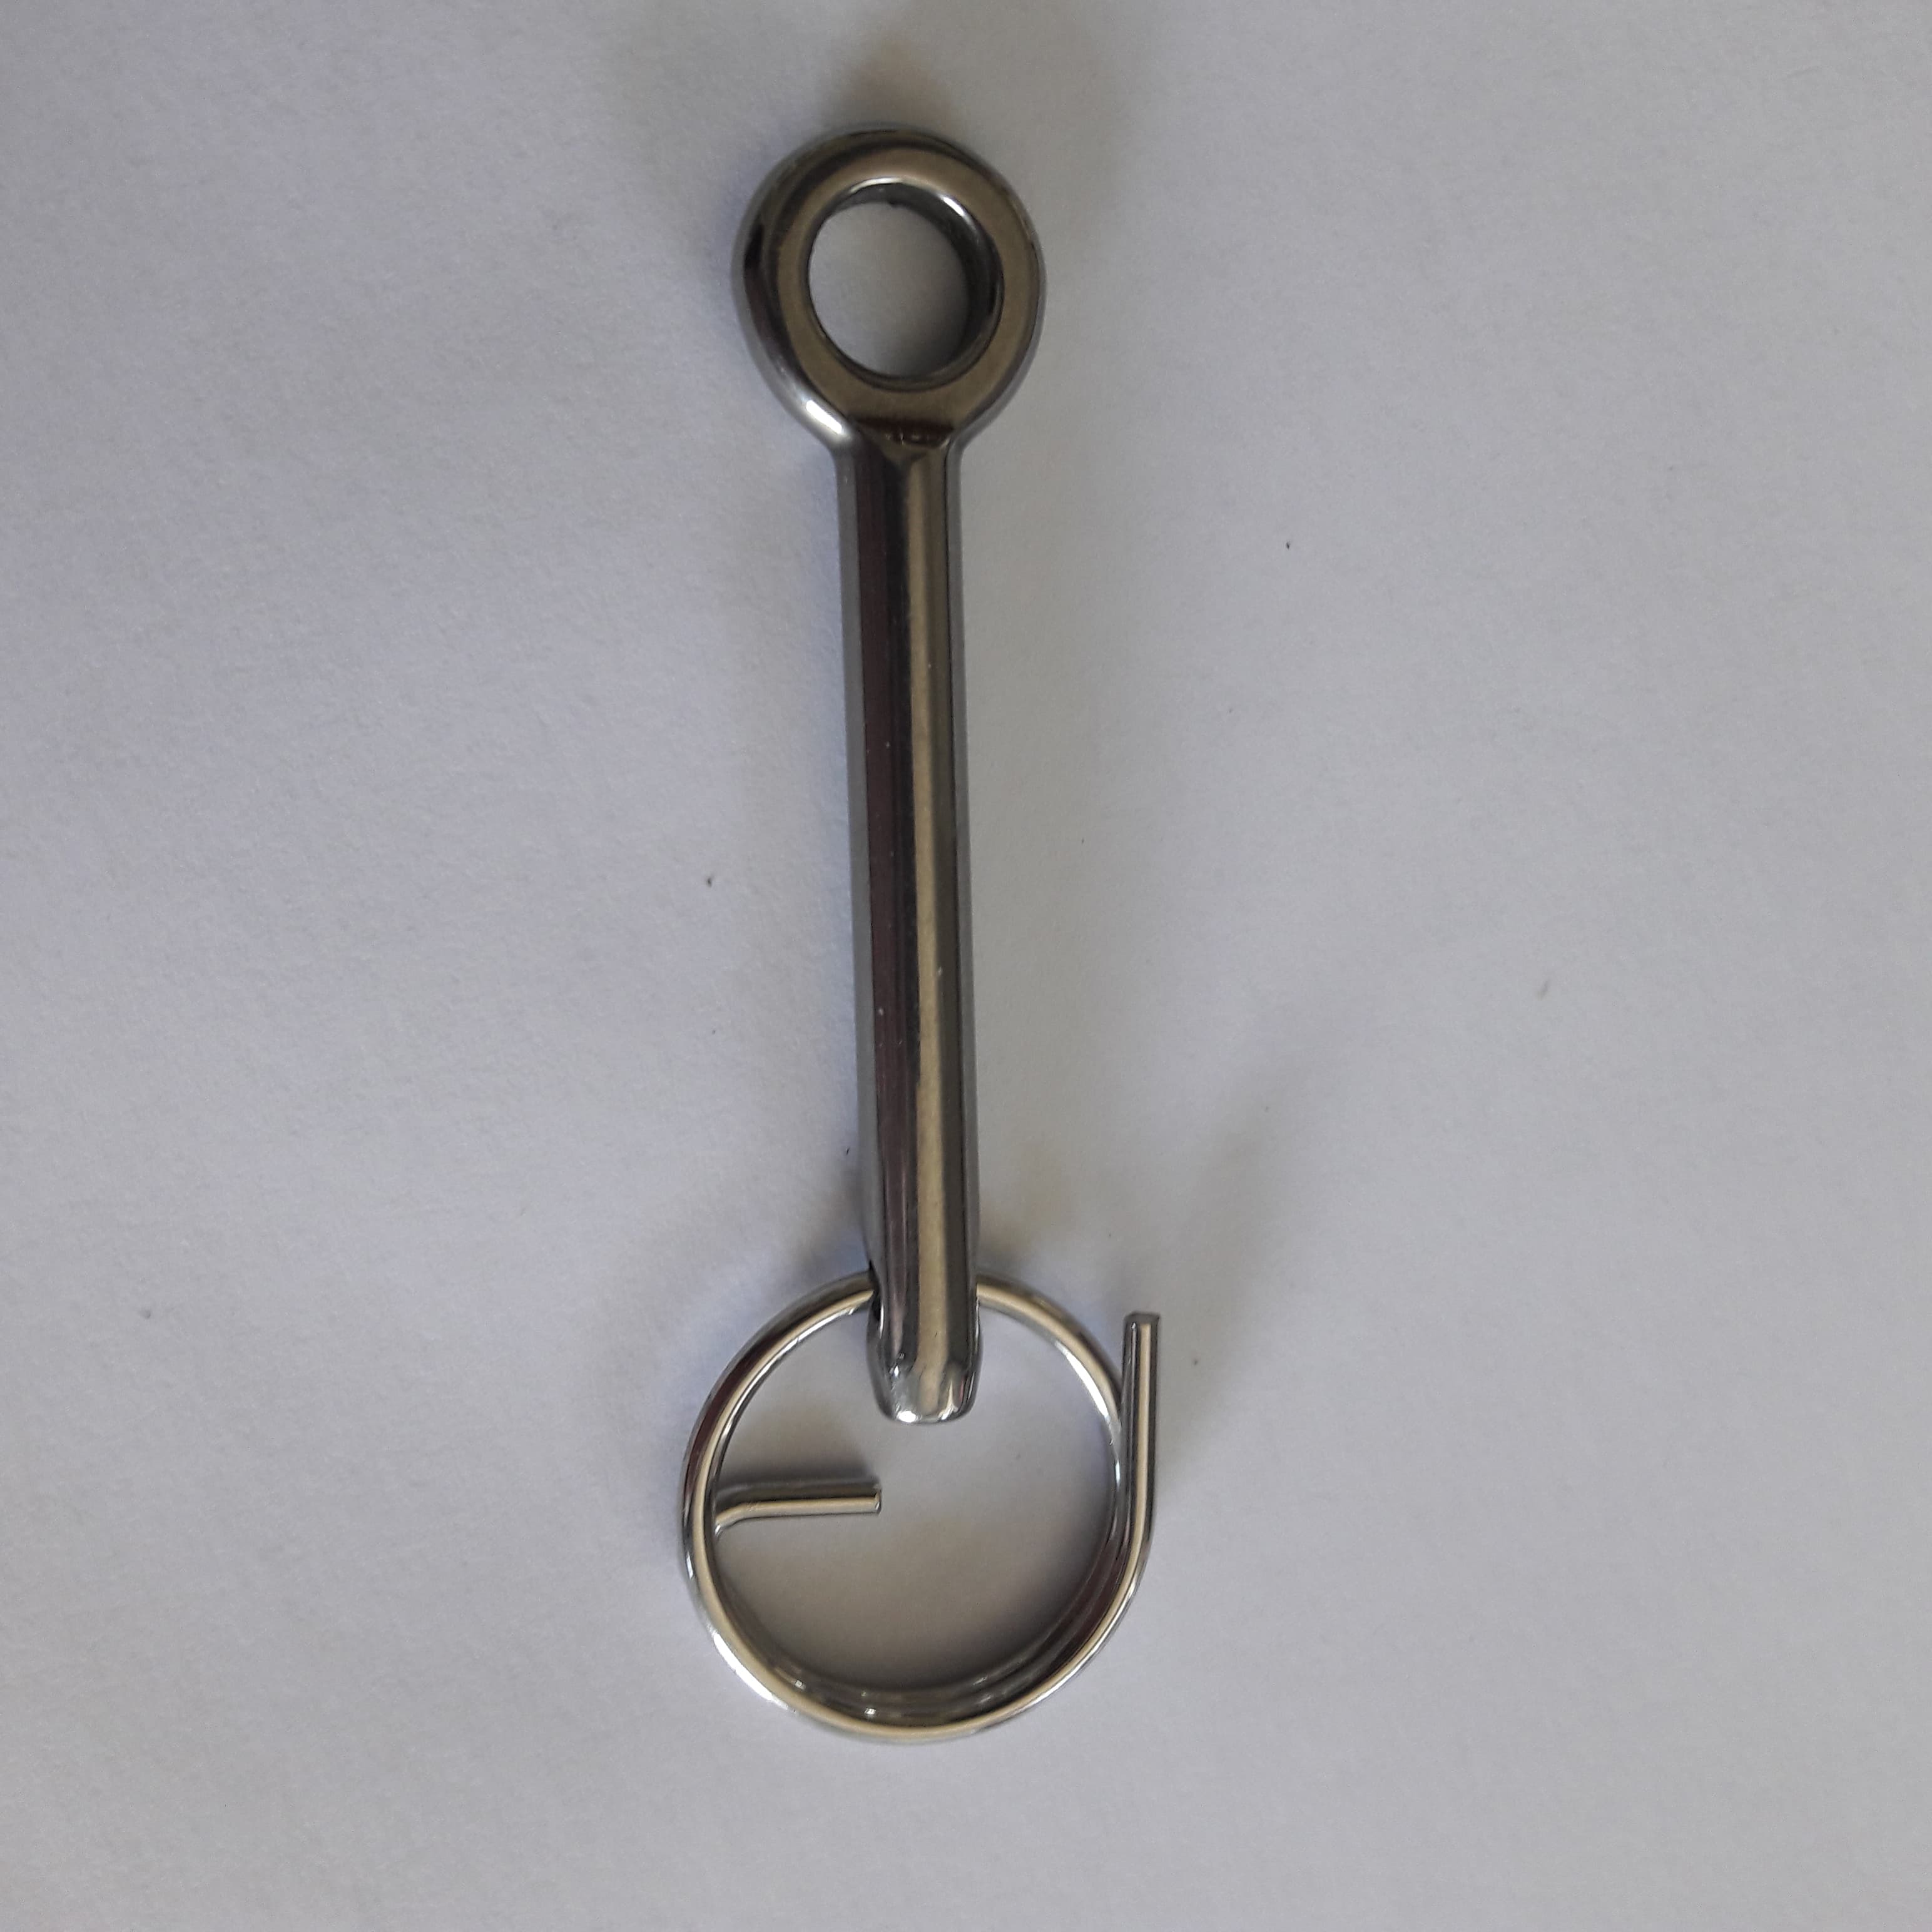 Wizz Pin Lock Ring 24mm (with tab)